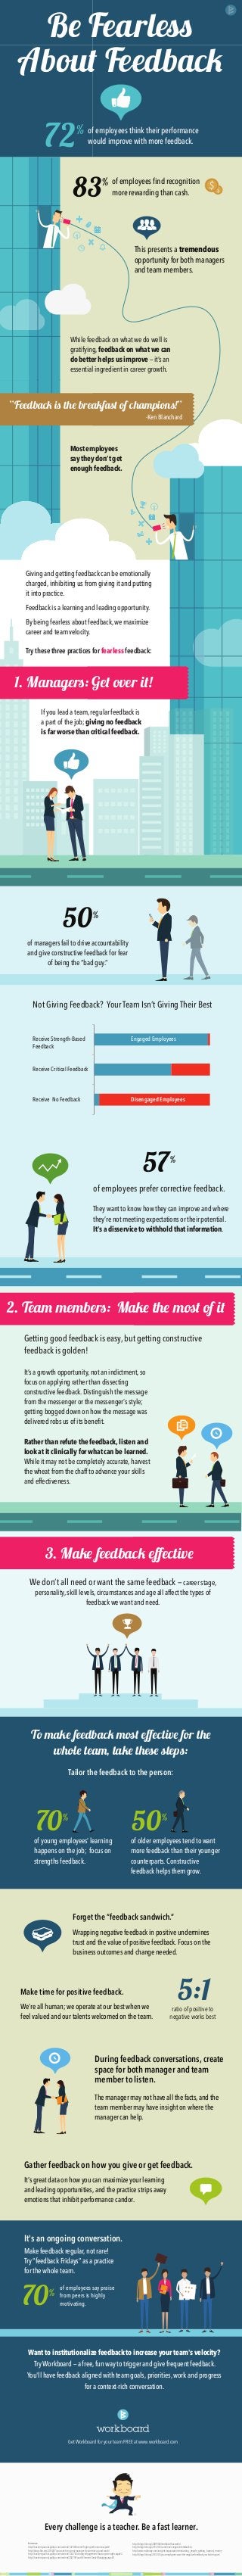 Be Fearless
About Feedback
This presents a tremendous
opportunity for both managers
and team members.
of employees think their performance
would improve with more feedback.
of employees find recognition
more rewarding than cash.
While feedback on what we do well is
gratifying, feedback on what we can
do better helps us improve — it’s an
essential ingredient in career growth.
If you lead a team, regular feedback is
a part of the job; giving no feedback
is far worse than critical feedback.
Most employees
say they don’t get
enough feedback.
Sources
http://businessjournal.gallup.com/content/147383/secret-higher-performance.aspx#2
http://blogs.hbr.org/2014/07/you-cant-be-a-great-manager-if-youre-not-a-good-coach/
http://businessjournal.gallup.com/content/124214/driving-engagement-focusing-strengths.aspx#2
http://businessjournal.gallup.com/content/28270/Fourth-Element-Great-Managing.aspx#2
Every challenge is a teacher. Be a fast learner.
Get Workboard for your team FREE at www.workboard.com
72%
83%
Giving and getting feedback can be emotionally
charged, inhibiting us from giving it and putting
it into practice.
Feedback is a learning and leading opportunity.
By being fearless about feedback, we maximize
career and team velocity.
57%
of employees prefer corrective feedback.
They want to know how they can improve and where
they’re not meeting expectations or their potential.
It’s a disservice to withhold that information.
We don’t all need or want the same feedback — career stage,
personality, skill levels, circumstances and age all affect the types of
feedback we want and need.
To make feedback most effective for the
whole team, take these steps:
50%
of managers fail to drive accountability
and give constructive feedback for fear
of being the “bad guy.”
Getting good feedback is easy, but getting constructive
feedback is golden!
Forget the “feedback sandwich.”
Make time for positive feedback.
70%
70%
of young employees’ learning
happens on the job; focus on
strengths feedback.
50%
of older employees tend to want
more feedback than their younger
counterparts. Constructive
feedback helps them grow.
Wrapping negative feedback in positive undermines
trust and the value of positive feedback. Focus on the
business outcomes and change needed.
During feedback conversations, create
space for both manager and team
member to listen.
The manager may not have all the facts, and the
team member may have insight on where the
manager can help.
We’re all human; we operate at our best when we
feel valued and our talents welcomed on the team.
Tailor the feedback to the person:
It's an ongoing conversation.
Make feedback regular, not rare!
Try “feedback Fridays” as a practice
for the whole team. 
of employees say praise
from peers is highly
motivating.
Gather feedback on how you give or get feedback.
It’s great data on how you can maximize your learning
and leading opportunities, and the practice strips away
emotions that inhibit performance candor.
It’s a growth opportunity, not an indictment, so
focus on applying rather than dissecting
constructive feedback. Distinguish the message
from the messenger or the messenger’s style;
getting bogged down on how the message was
delivered robs us of its benefit.
Rather than refute the feedback, listen and
look at it clinically for what can be learned.
While it may not be completely accurate, harvest
the wheat from the chaff to advance your skills
and effectiveness.
-Ken Blanchard
“Feedback is the breakfast of champions!”
1. Managers: Get over it!
2. Team members: Make the most of it
Try these three practices for fearless feedback:
3. Make feedback effective
Want to institutionalize feedback to increase your team's velocity?
Try Workboard — a free, fun way to trigger and give frequent feedback.
You'll have feedback aligned with team goals, priorities, work and progress
for a context-rich conversation.
http://blogs.hbr.org/2009/04/feedback-that-works/
http://blogs.hbr.org/2013/01/sometimes-negative-feedback-is/
http://www.mckinsey.com/insights/organization/motivating_people_getting_beyond_money
http://blogs.hbr.org/2014/01/your-employees-want-the-negative-feedback-you-hate-to-give/
5:1ratio of positive to
negative works best
Not Giving Feedback? Your Team Isn’t Giving Their Best
Receive No Feedback
Receive Critical Feedback
Receive Strength-Based
Feedback
Disengaged Employees
Engaged Employees
 